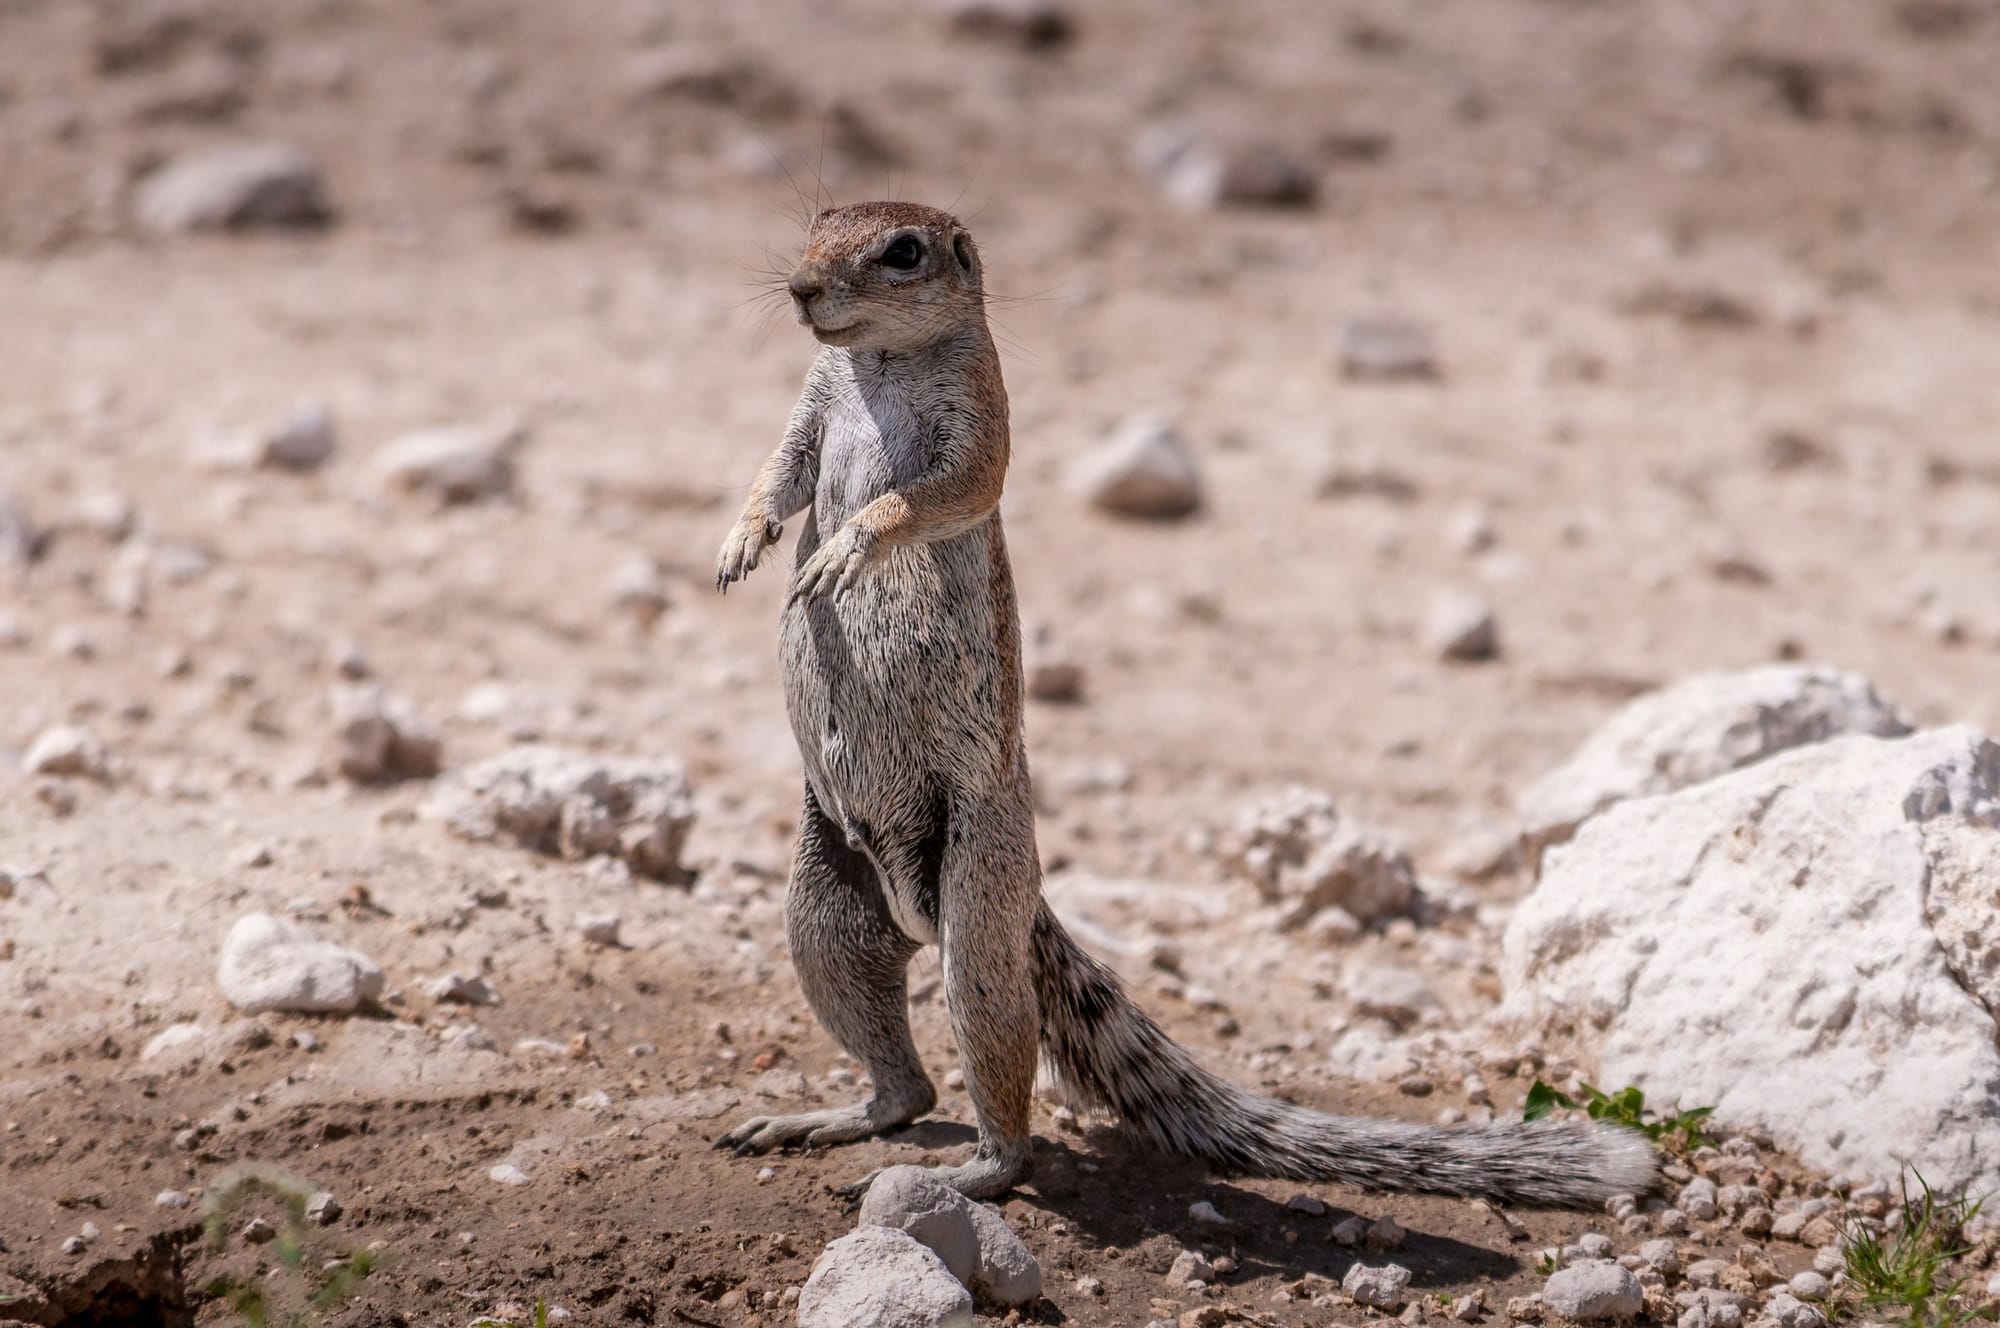 A very cute small animal that looks like a meerkat or a squirrel in a rocky area